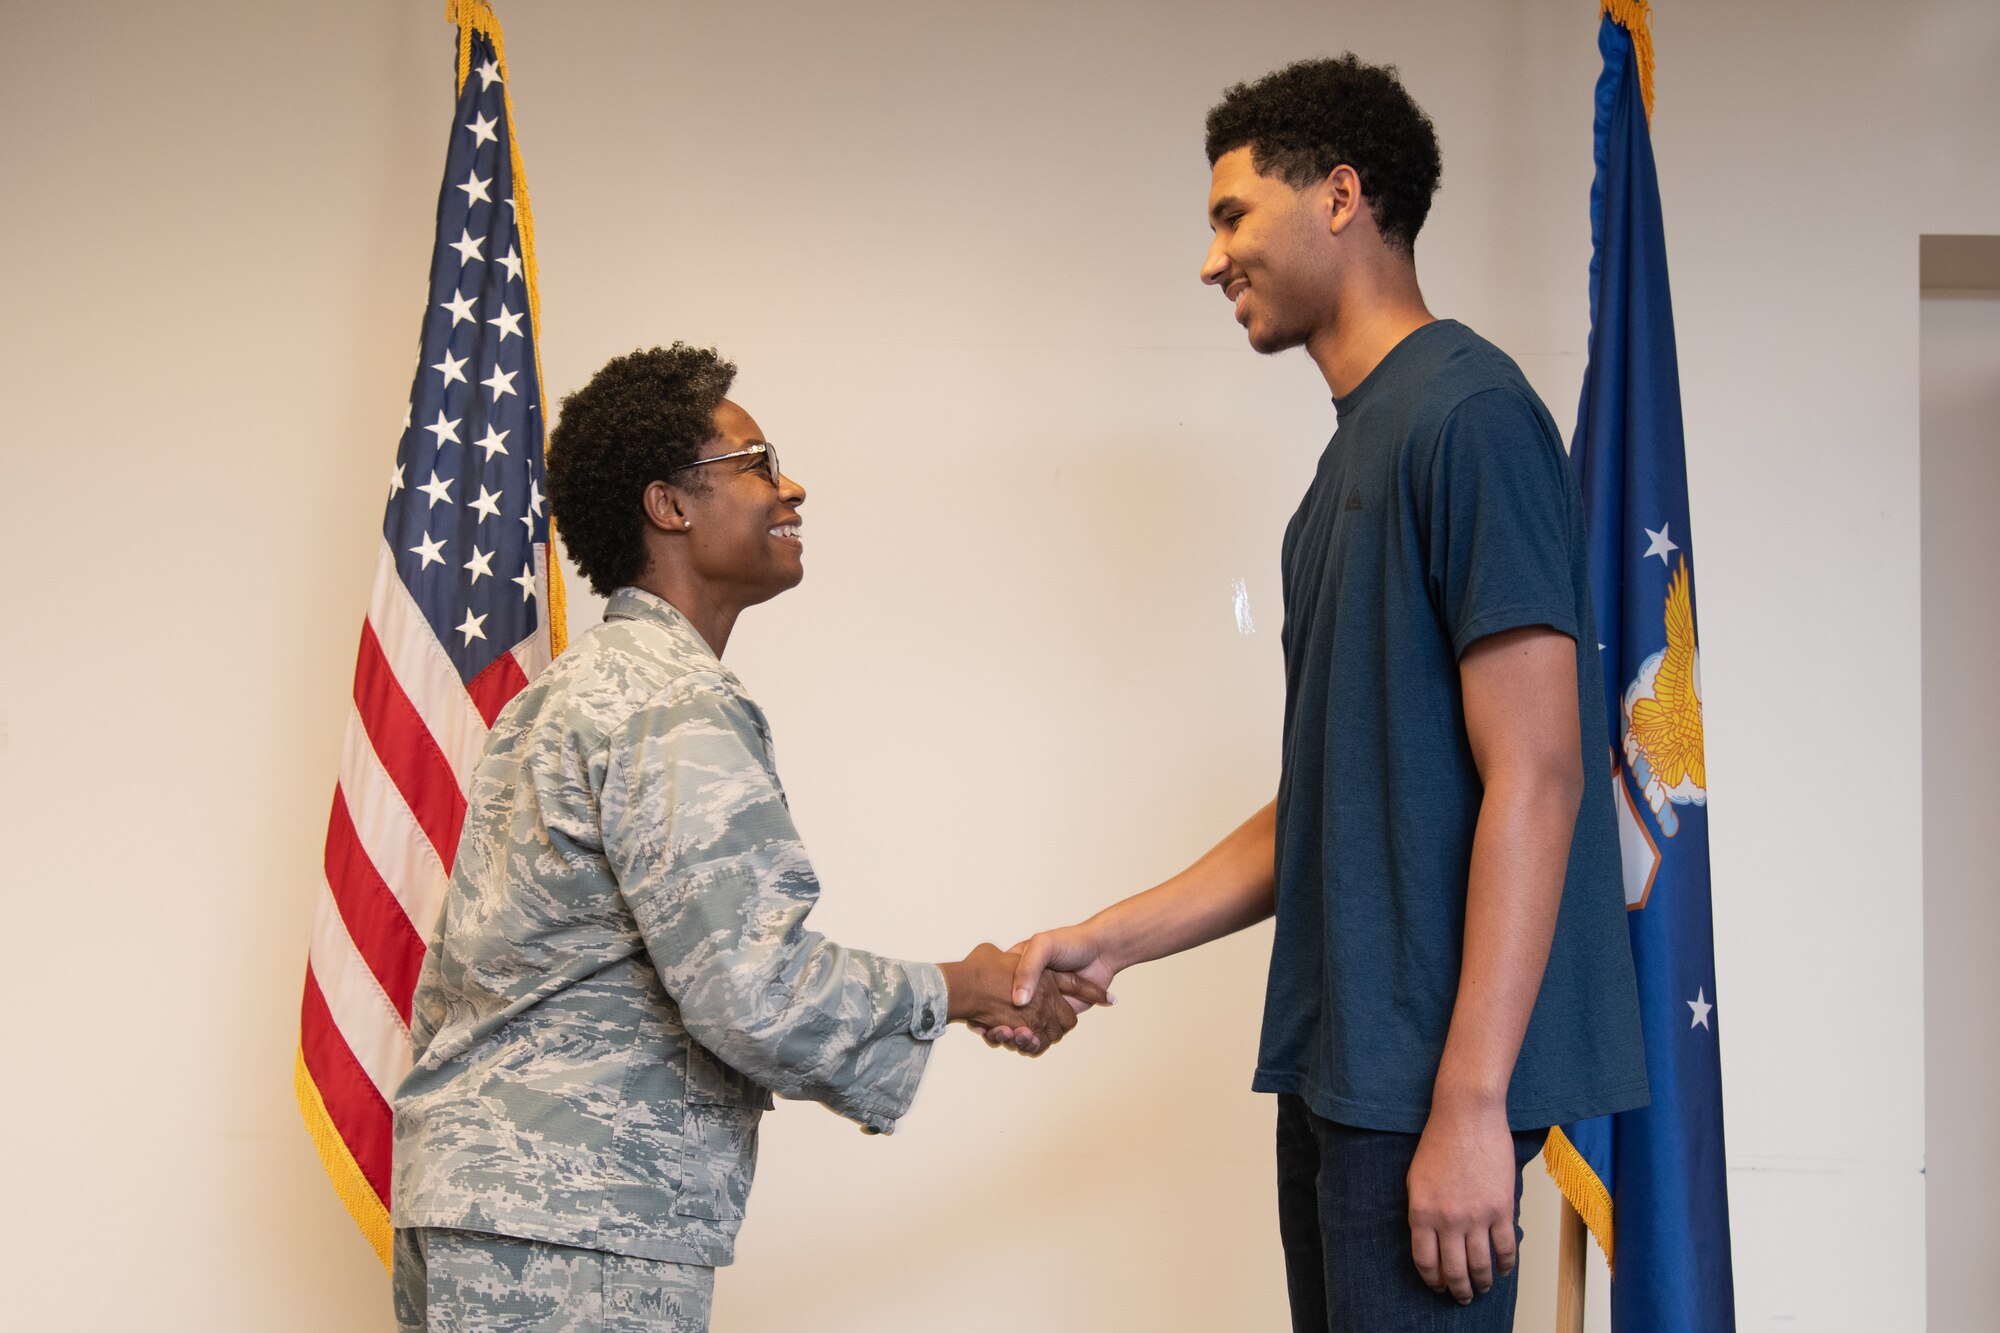 A new member joins the Virginia Air National Guard